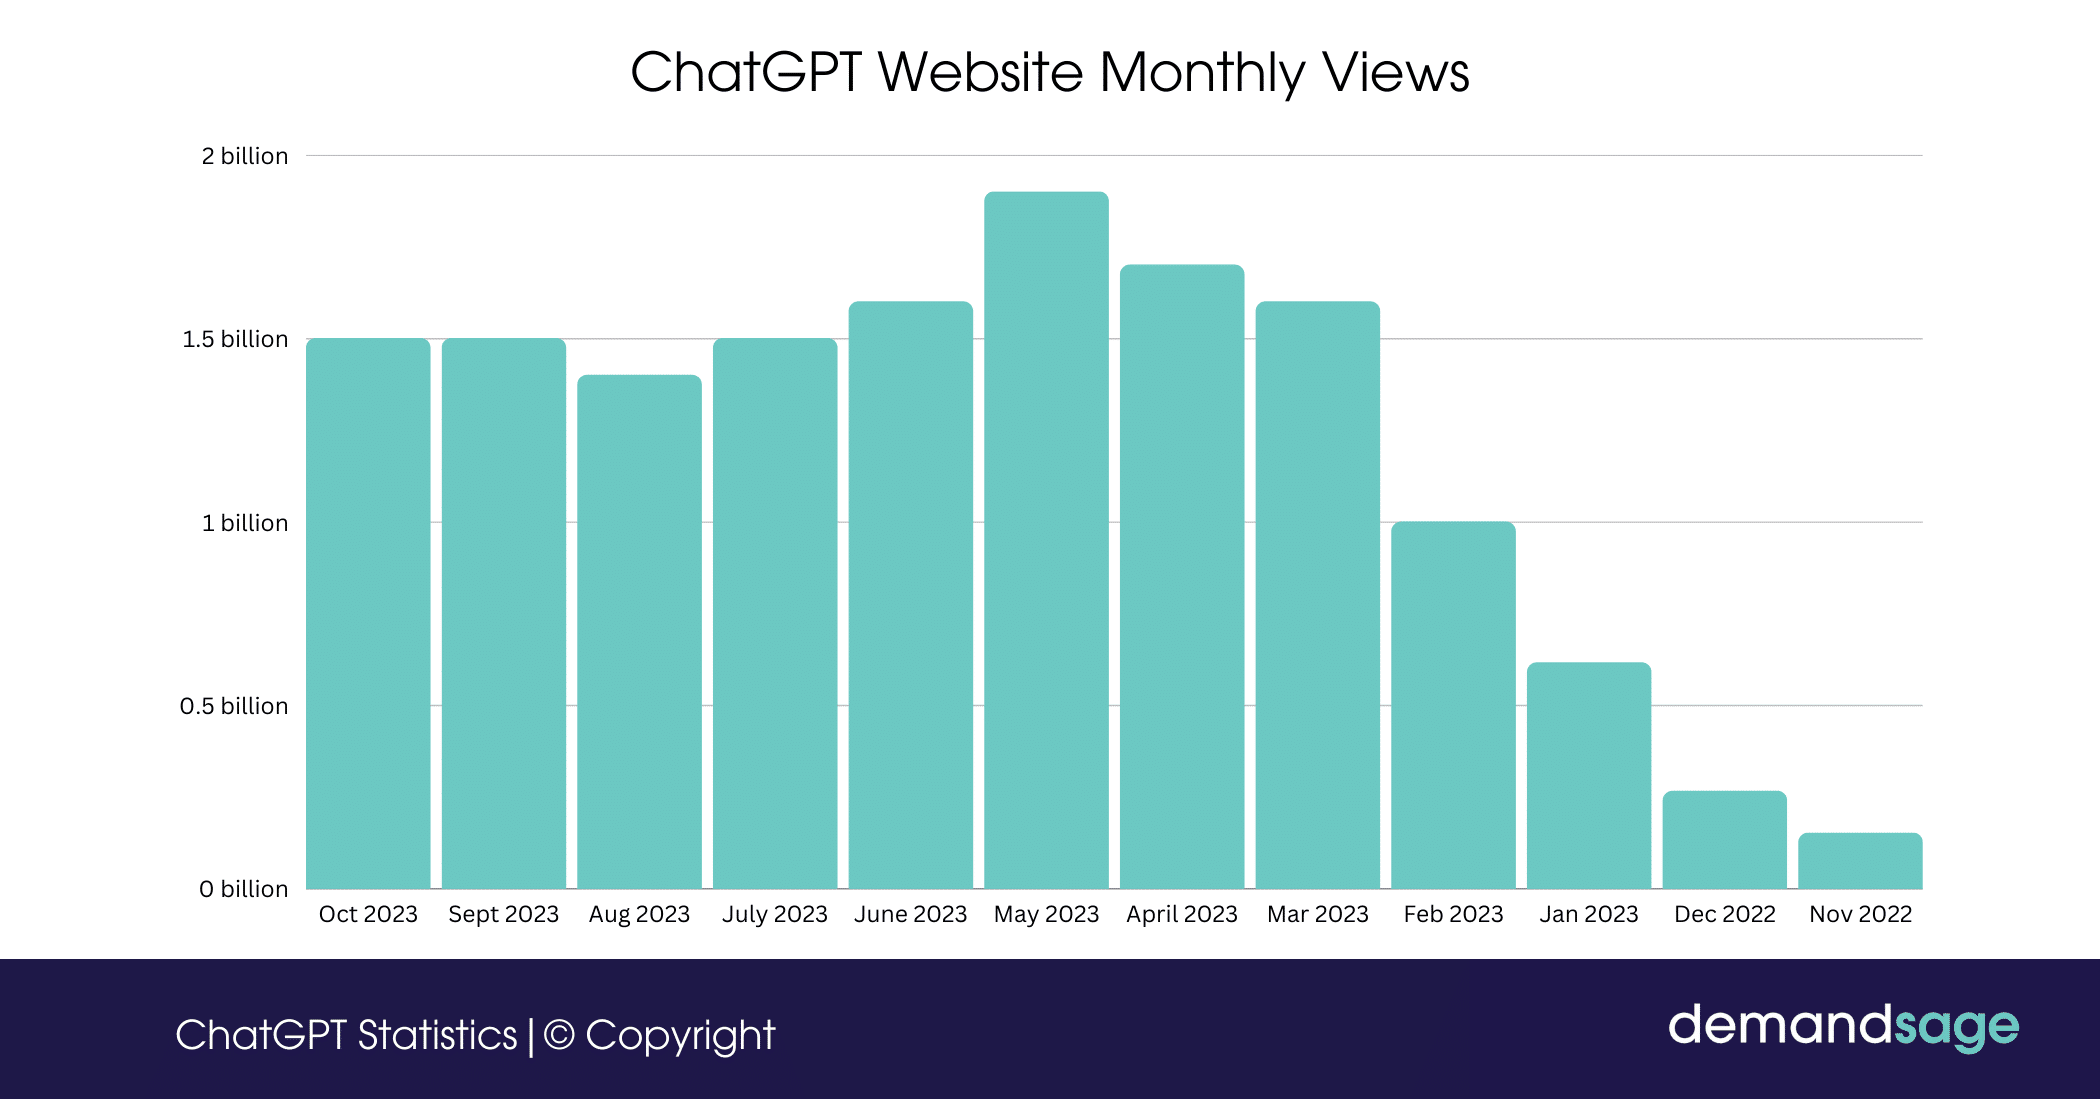 ChatGPT Website Monthly Views